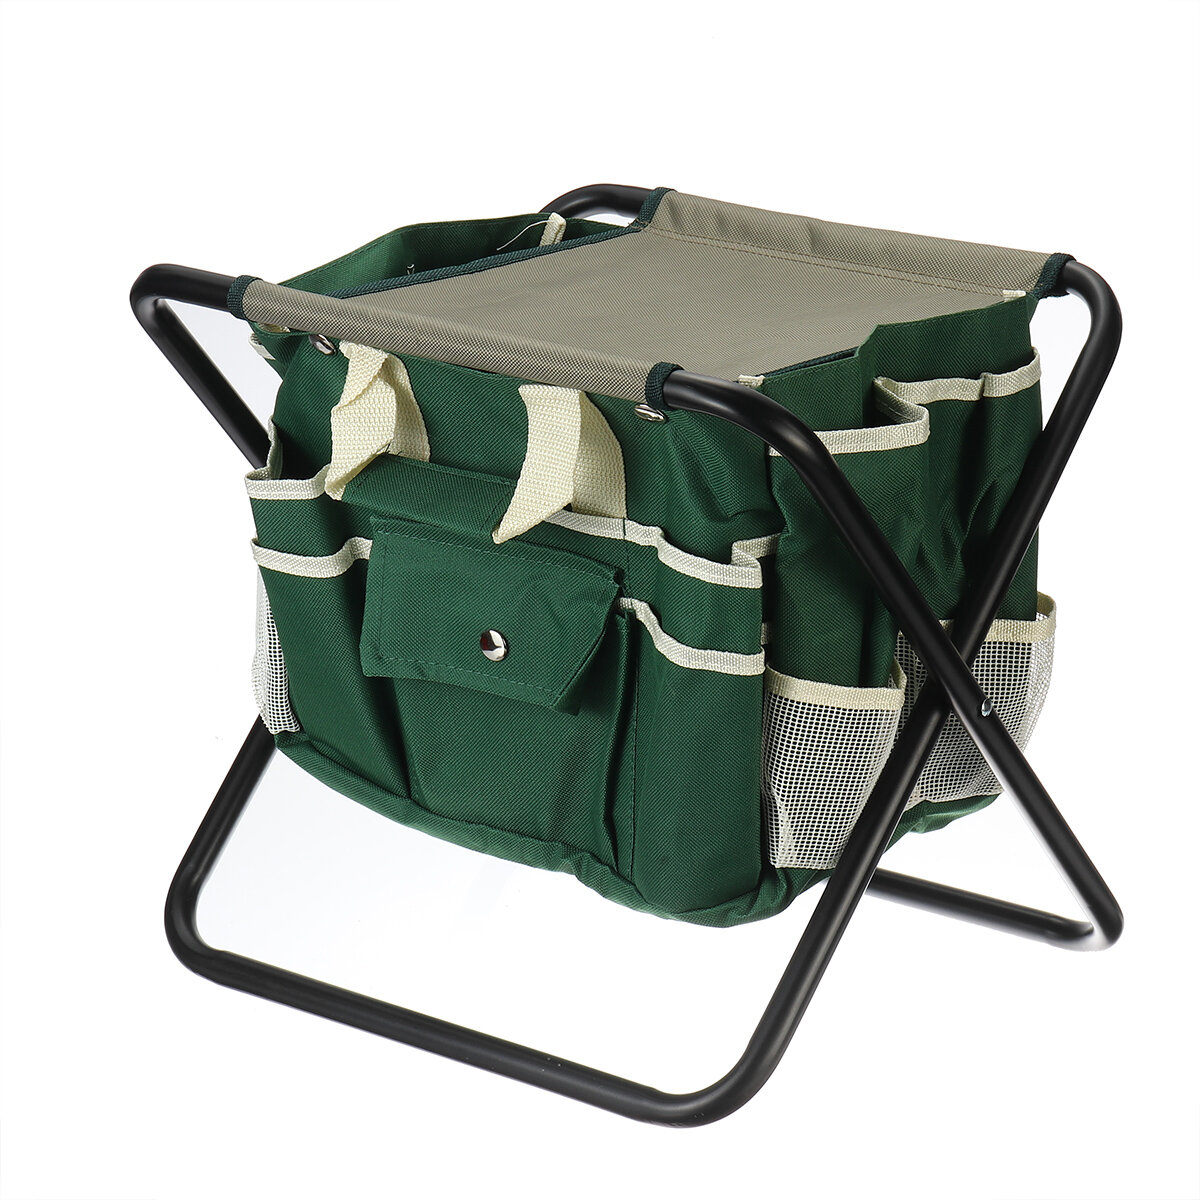 12.2x15.4x13.4inch Folding Kneeler Seat Oxford Cloth Camping Chair Fishing Seat with Detachable Storage Organizer Tool Tote Bag For Home Garden Yard